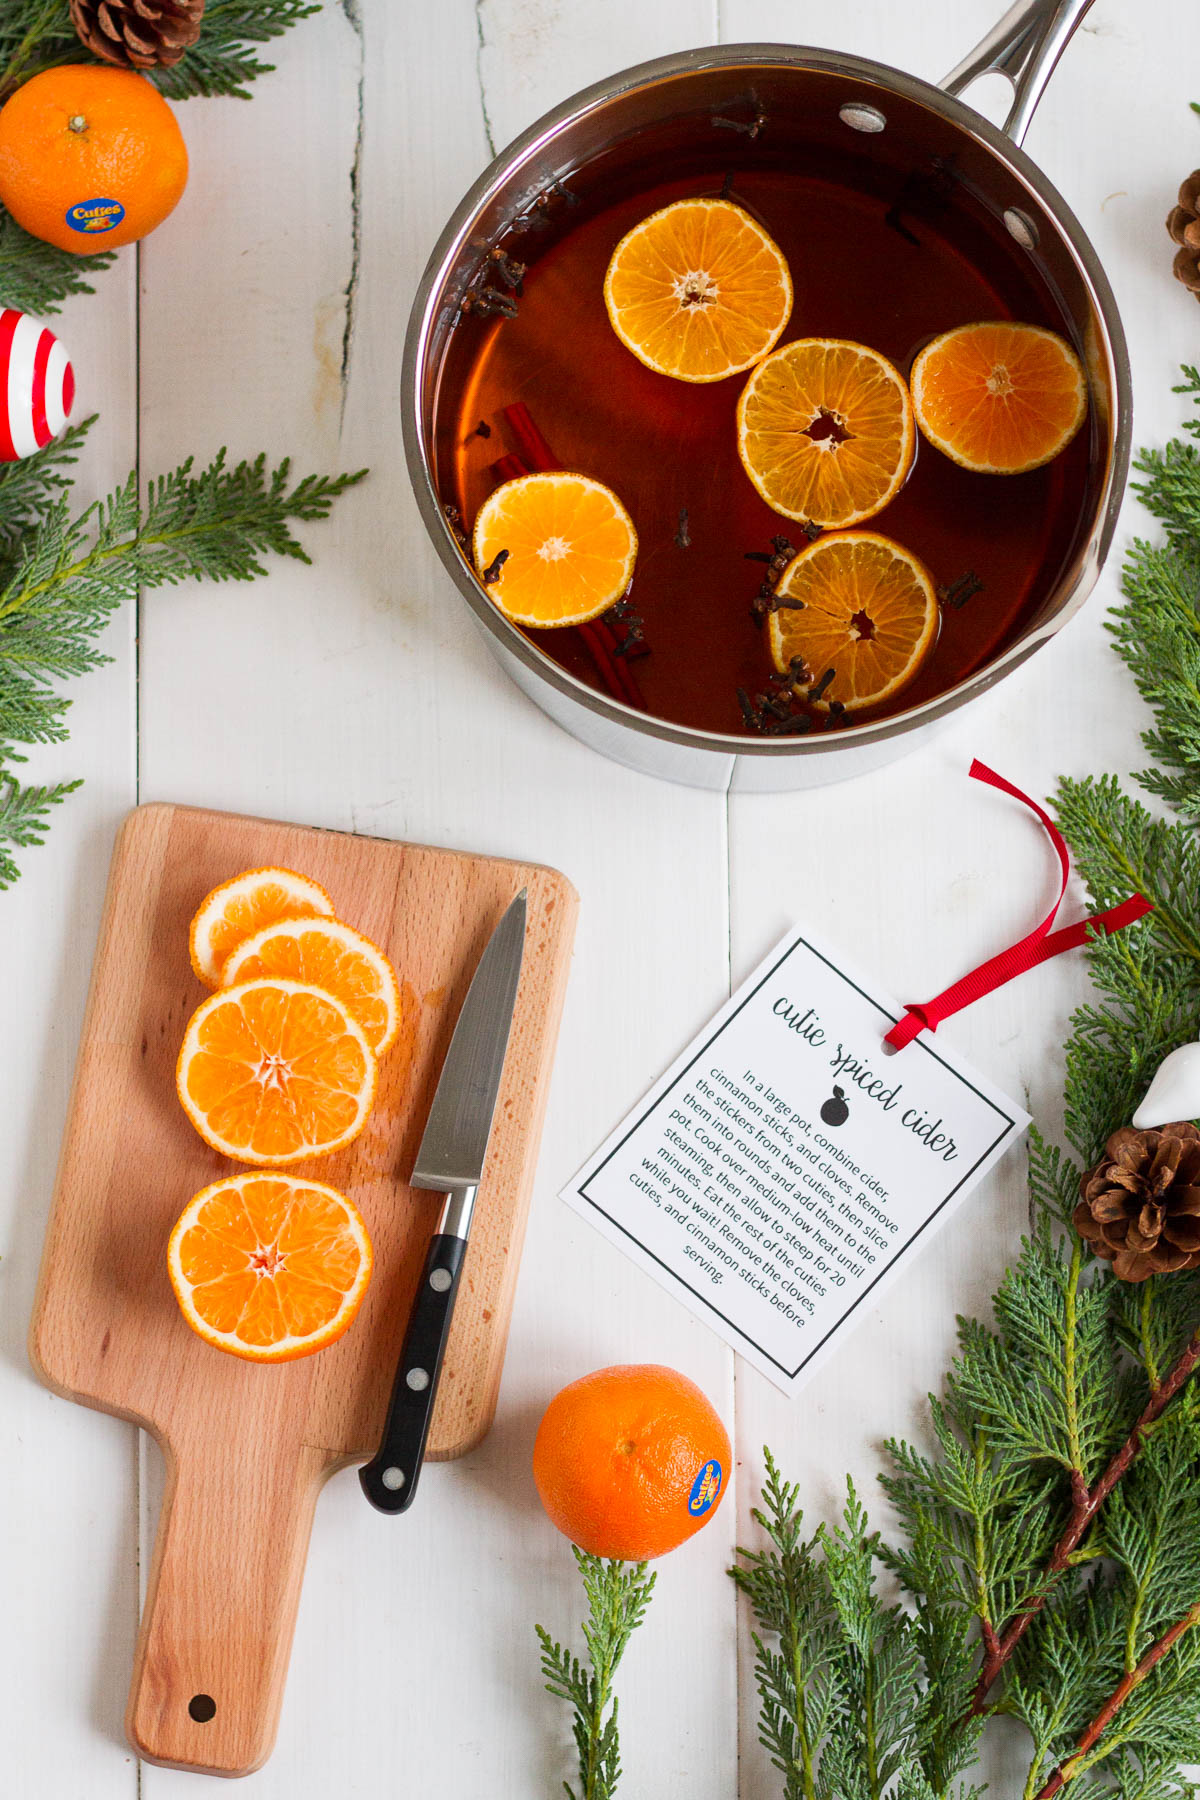 These easy spiced cider with cinnamon, cloves, and cuties is a perfect gift to put together for friends, neighbors, and teachers!